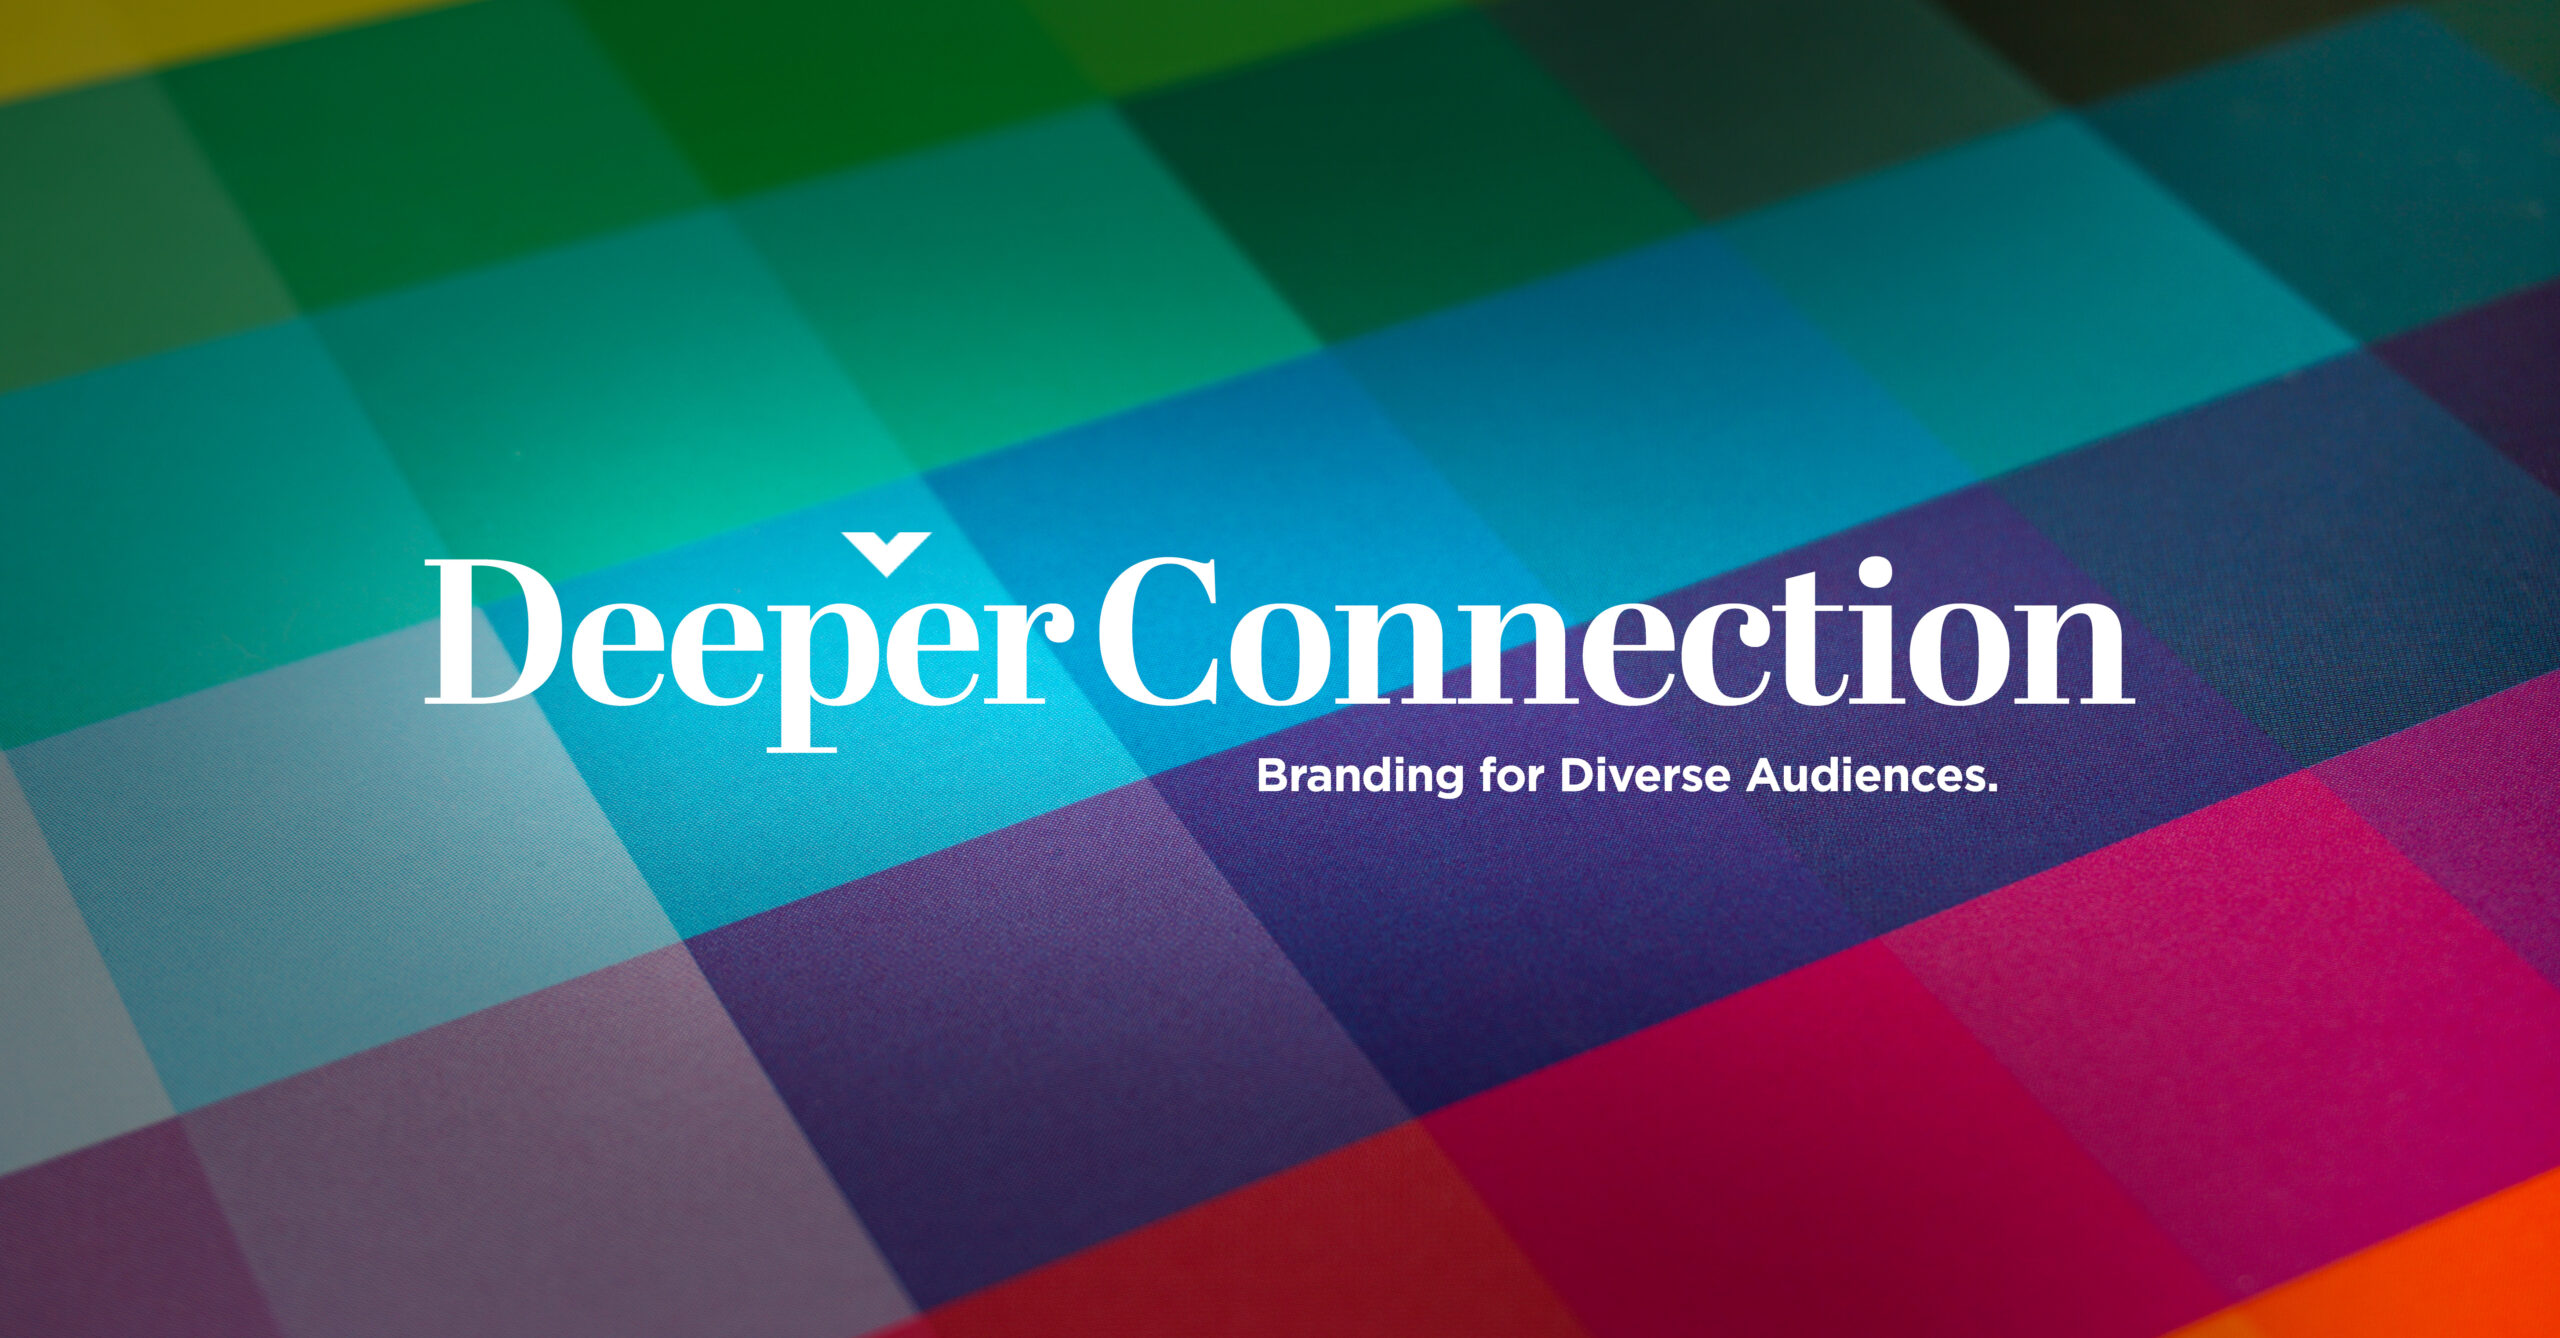 Text on multi-color background reads Deeper Connection, Branding for Diverse Audiences.